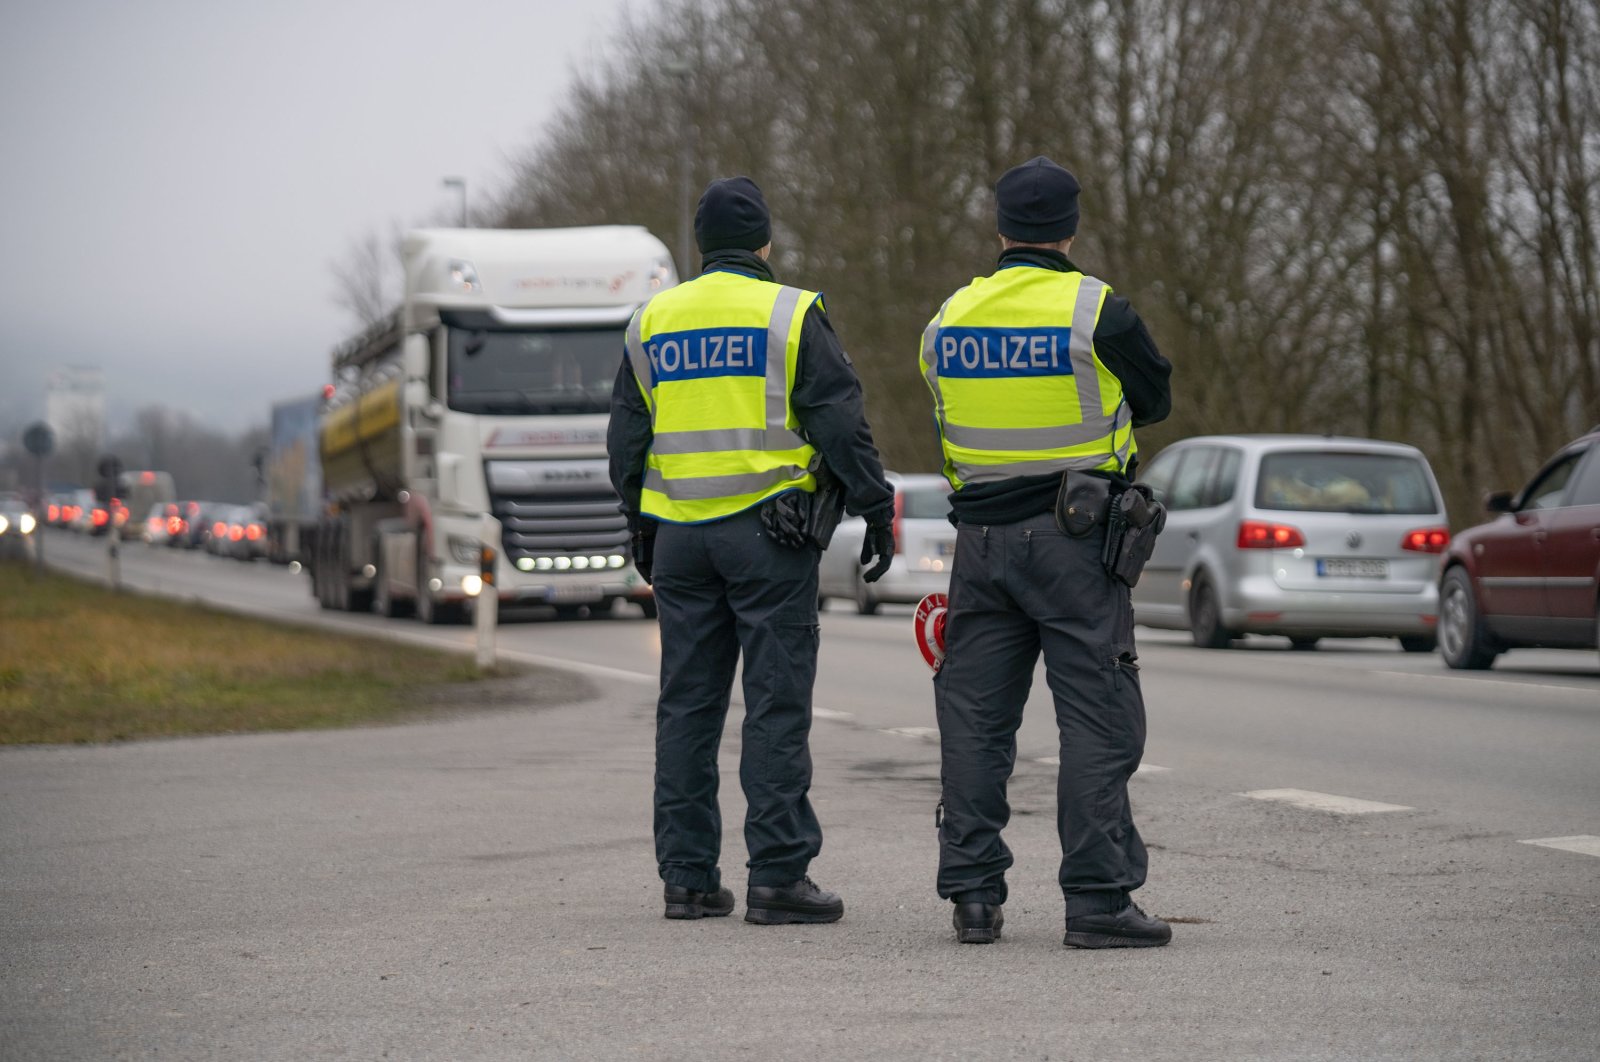 At the German-Austrian border on the B512, federal police officers control the entry traffic into Germany at the Schärding border on the B512. (Getty Images)